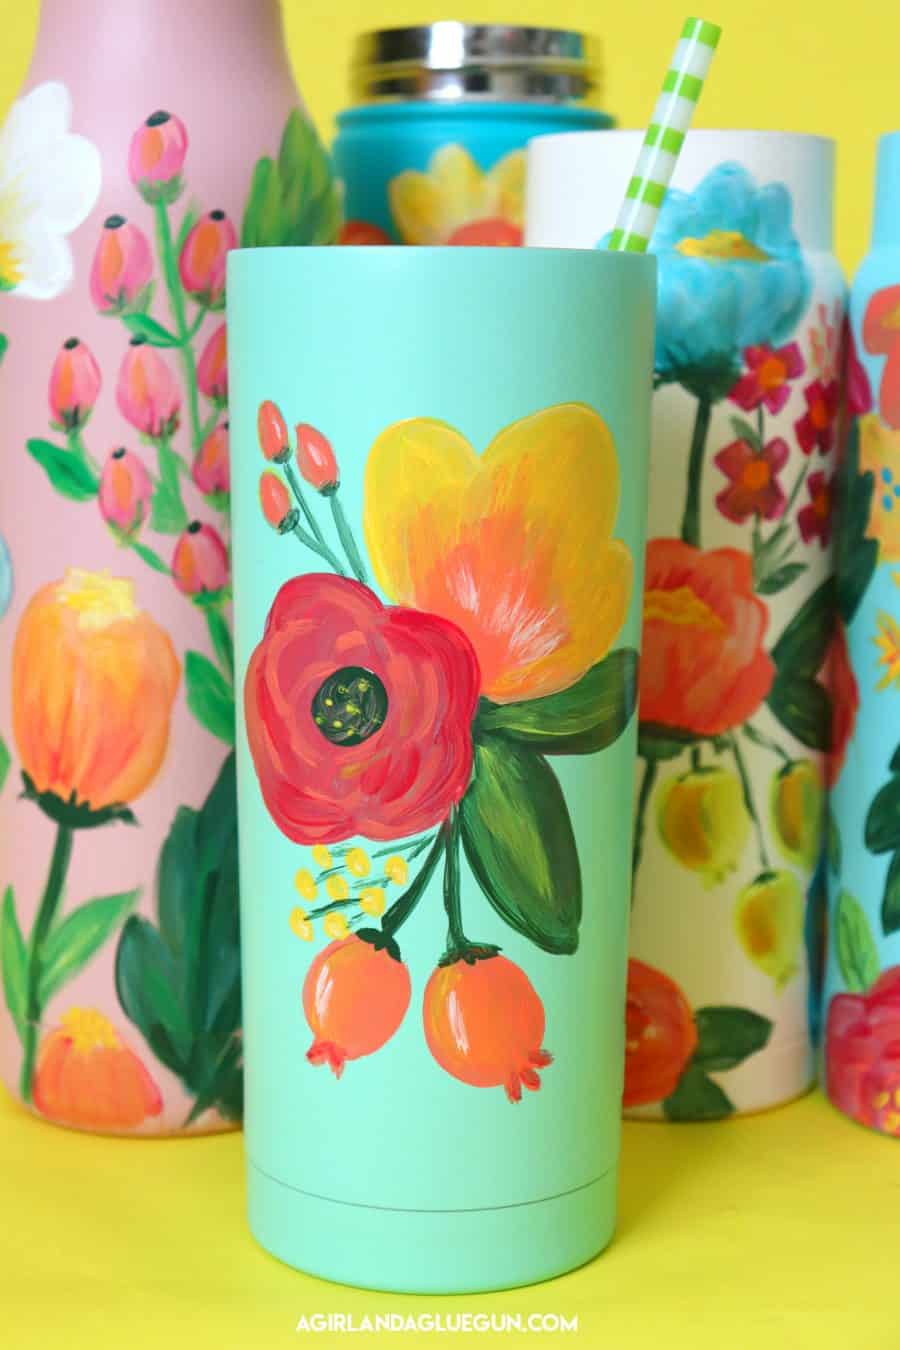 Hand-painted water bottles - A girl and a glue gun